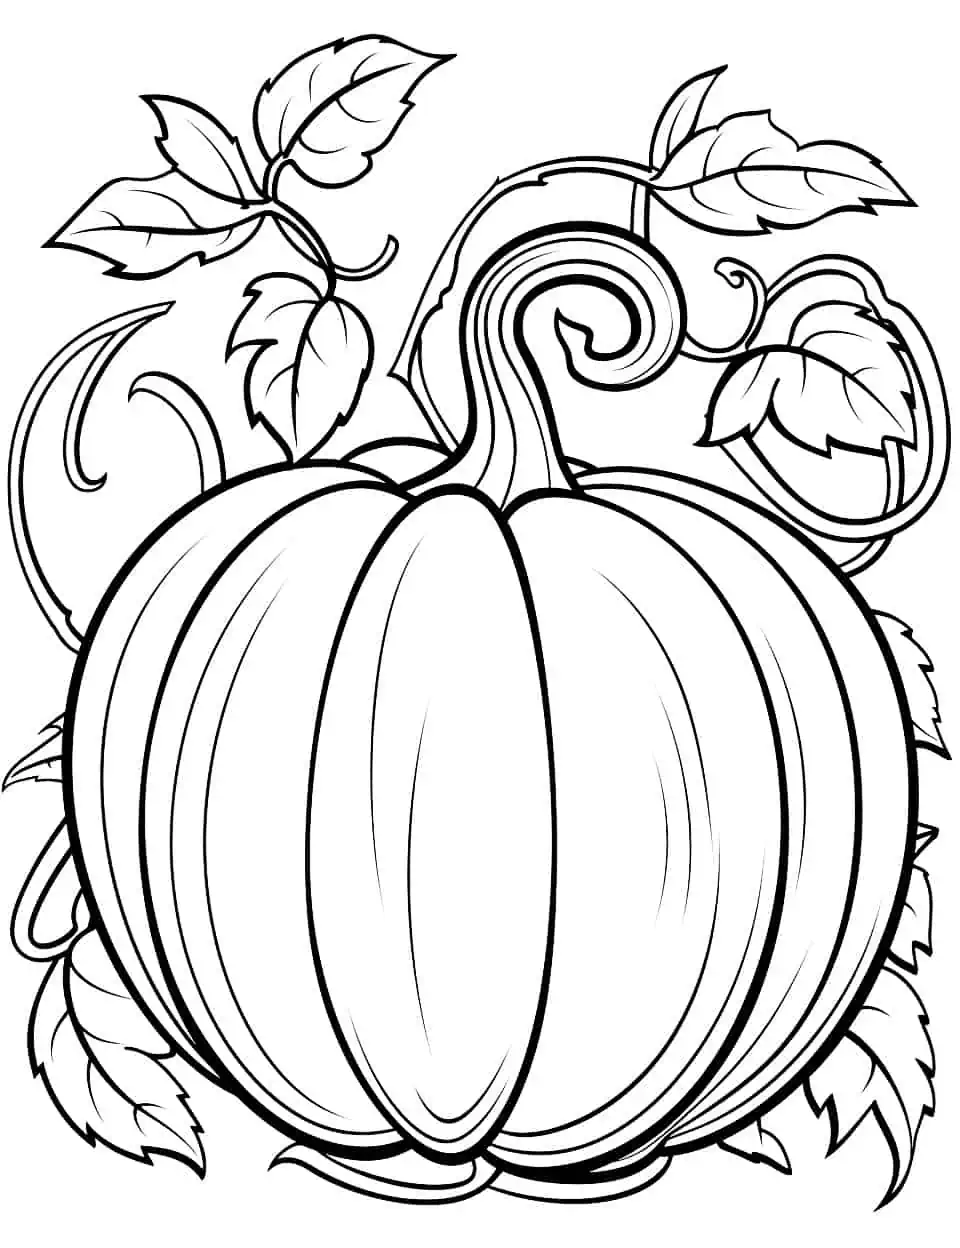 Pretty Pumpkin Vines Coloring Page - A beautiful pumpkin nestled in pretty vines and leaves, ideal for those who love detailed landscapes.